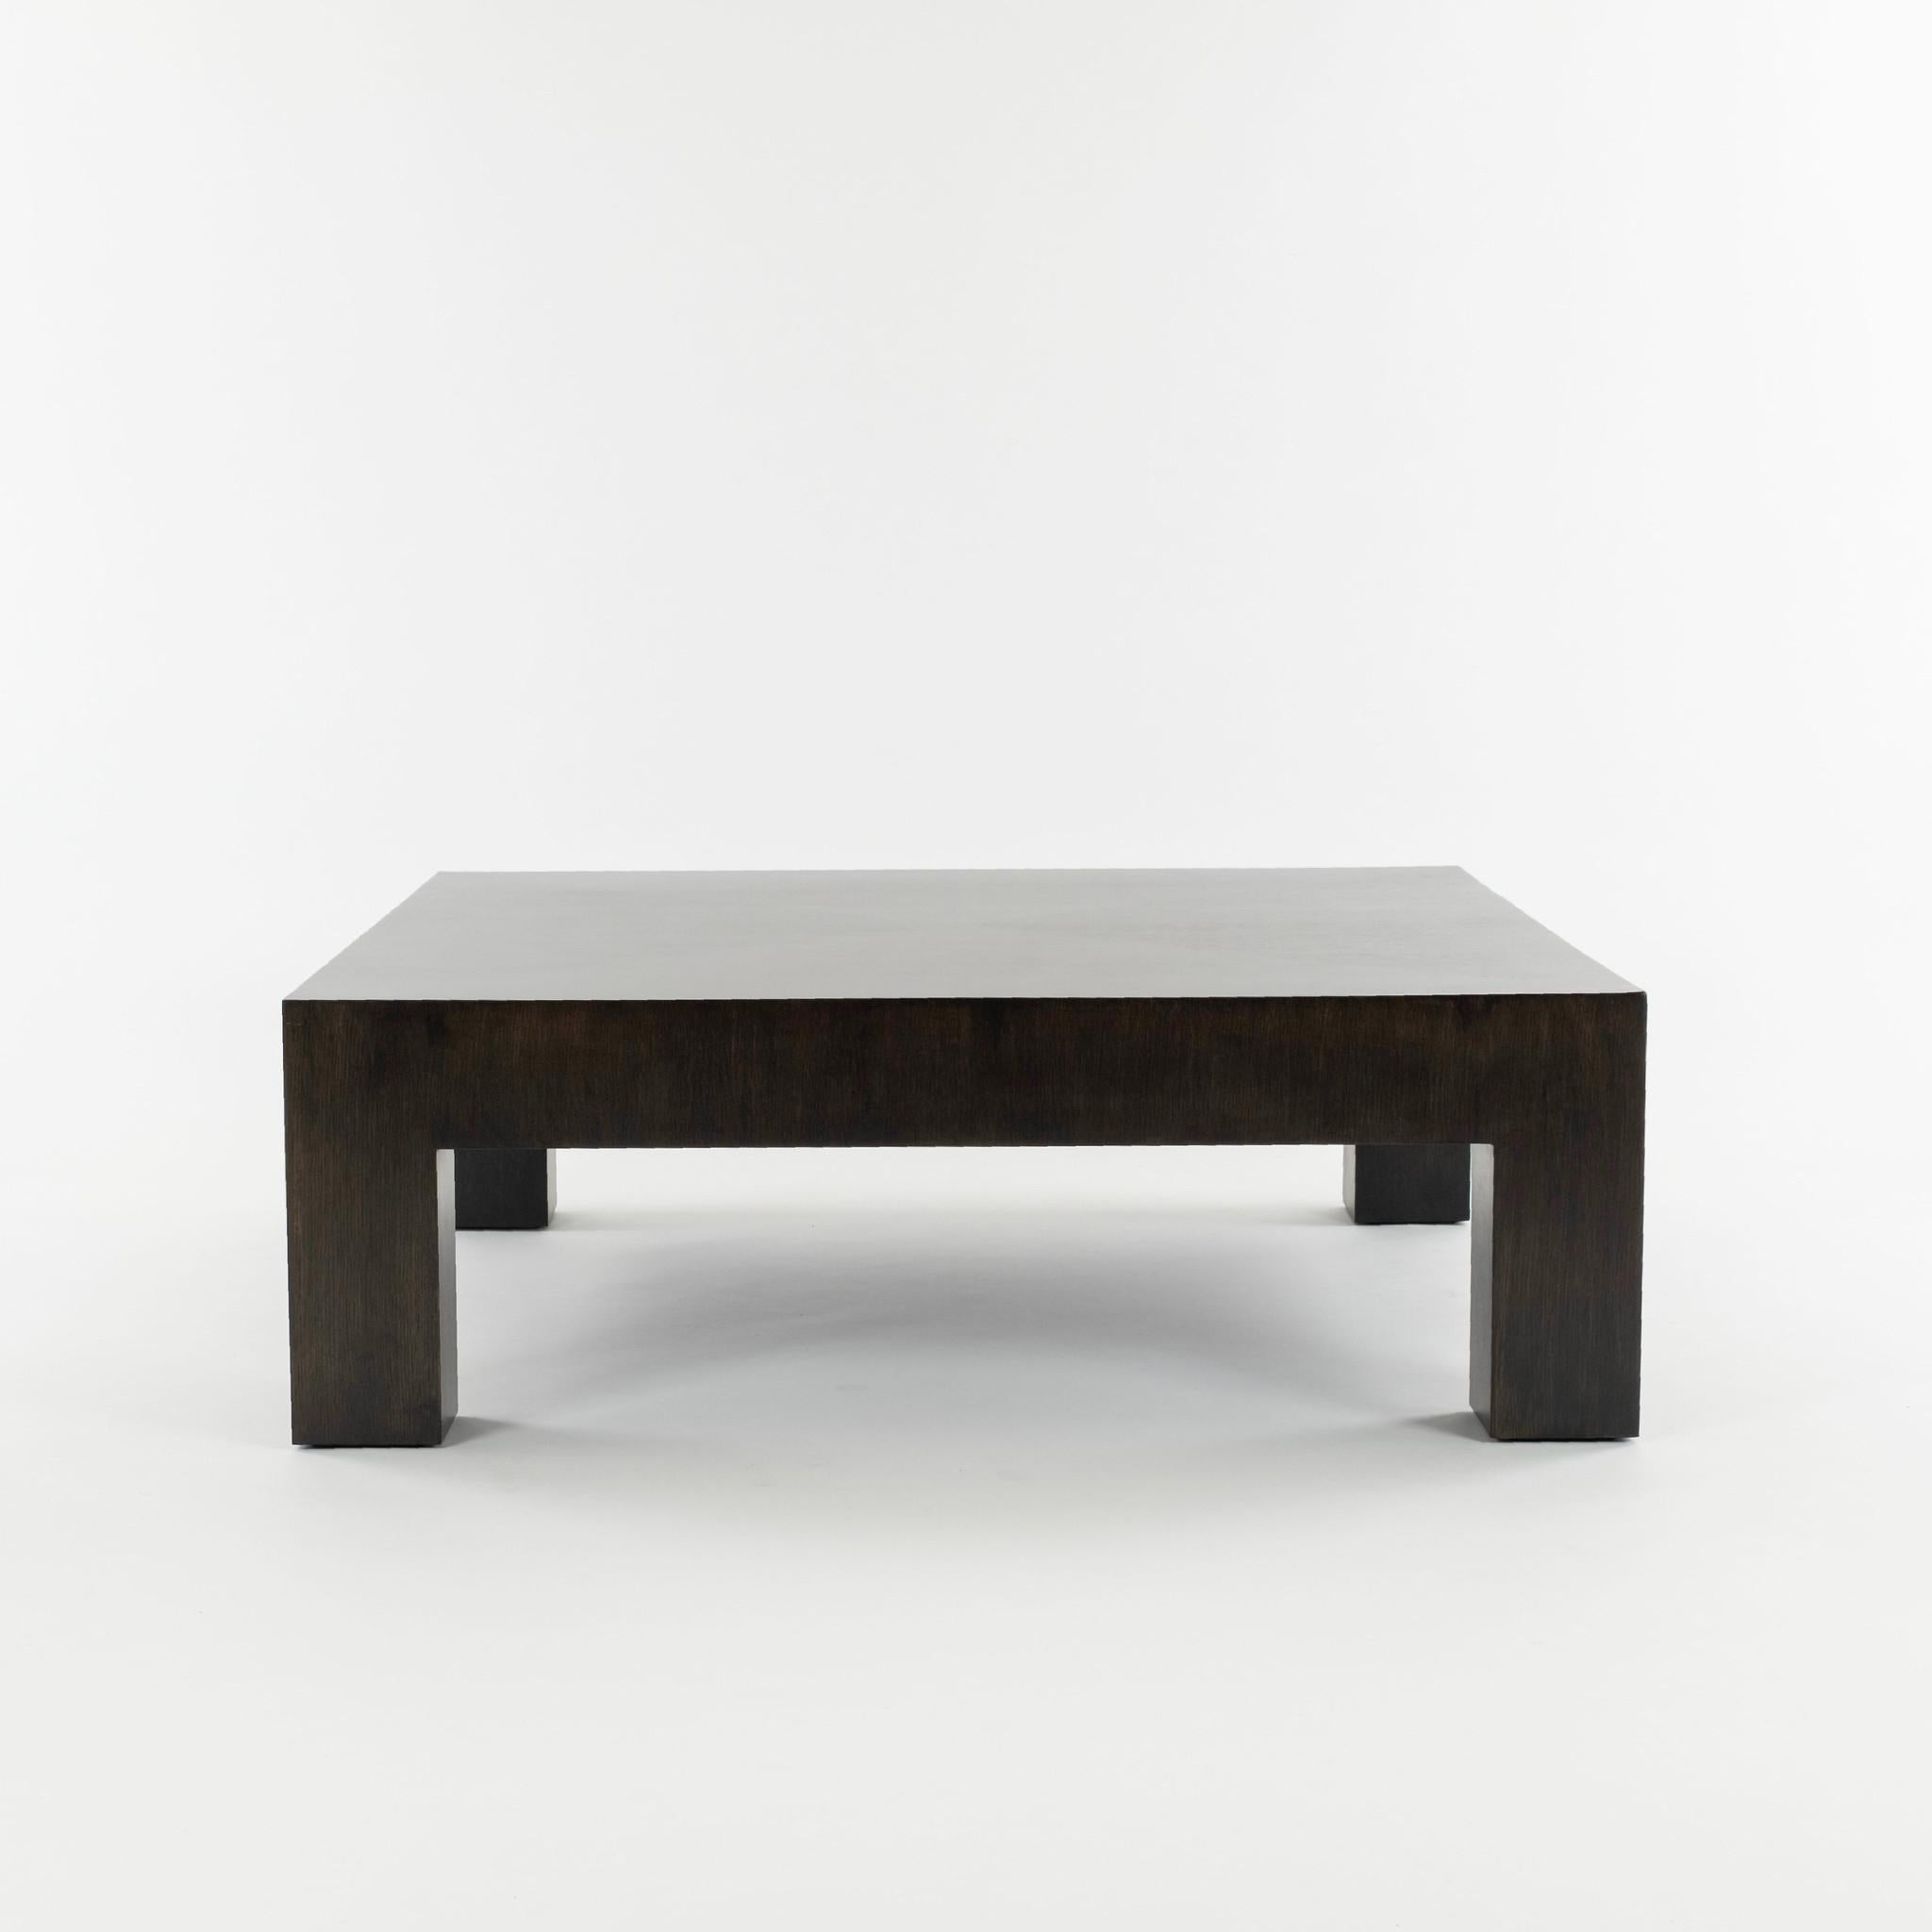 Large Parsons style wood cocktail table with single drawer and finished in espresso oak veneer. Also available in natural or black.